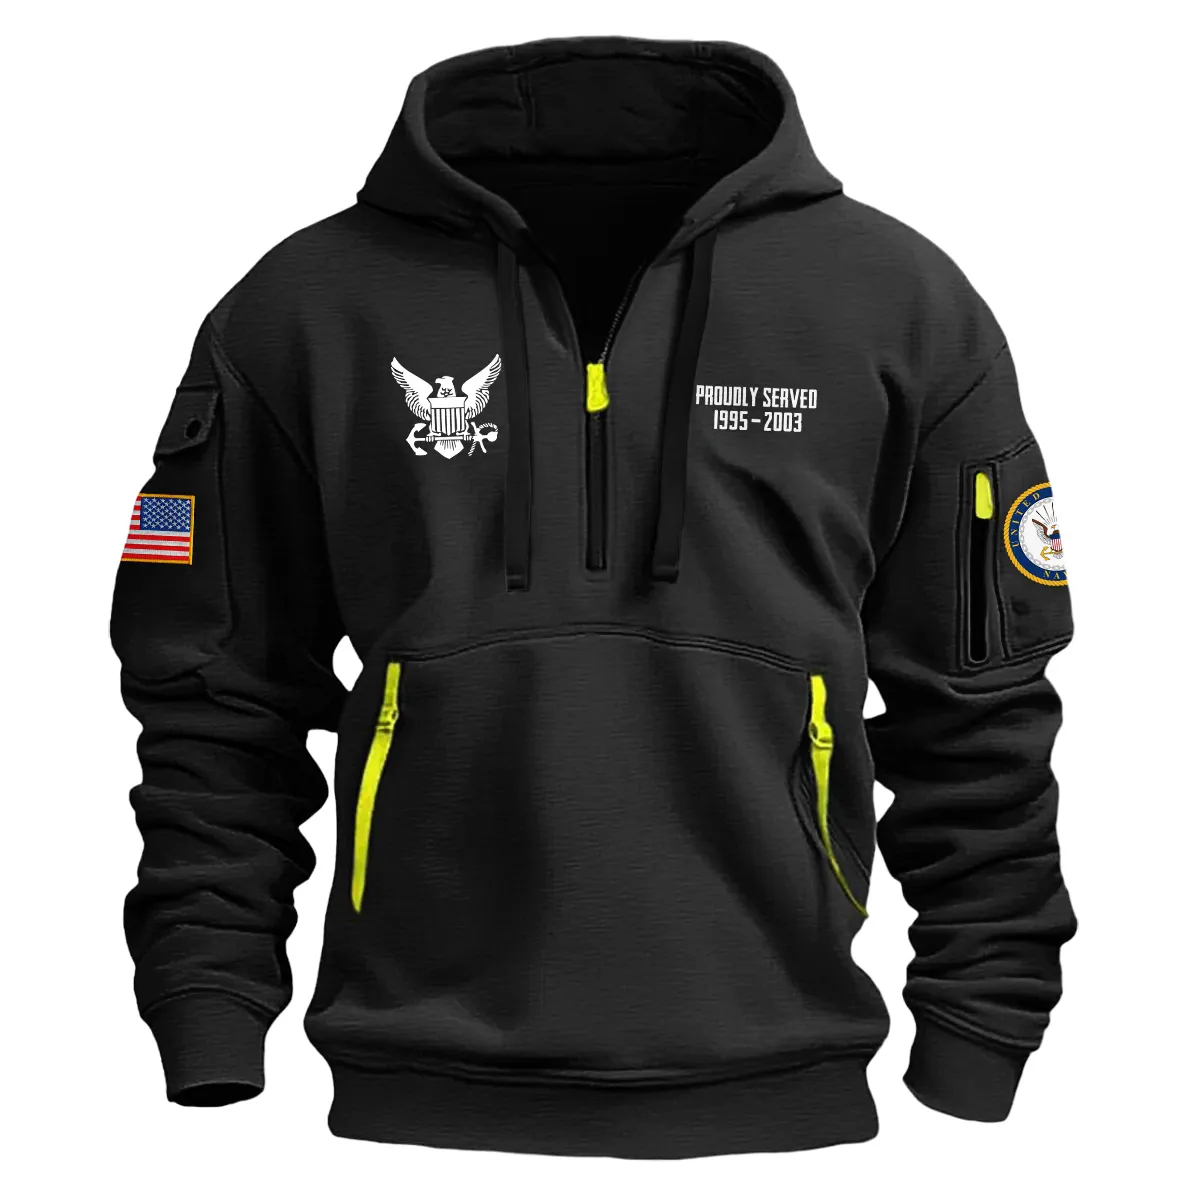 US Military All Branches! Personalized Gift MCPON U.S. Navy Fashion Hoodie Half Zipper